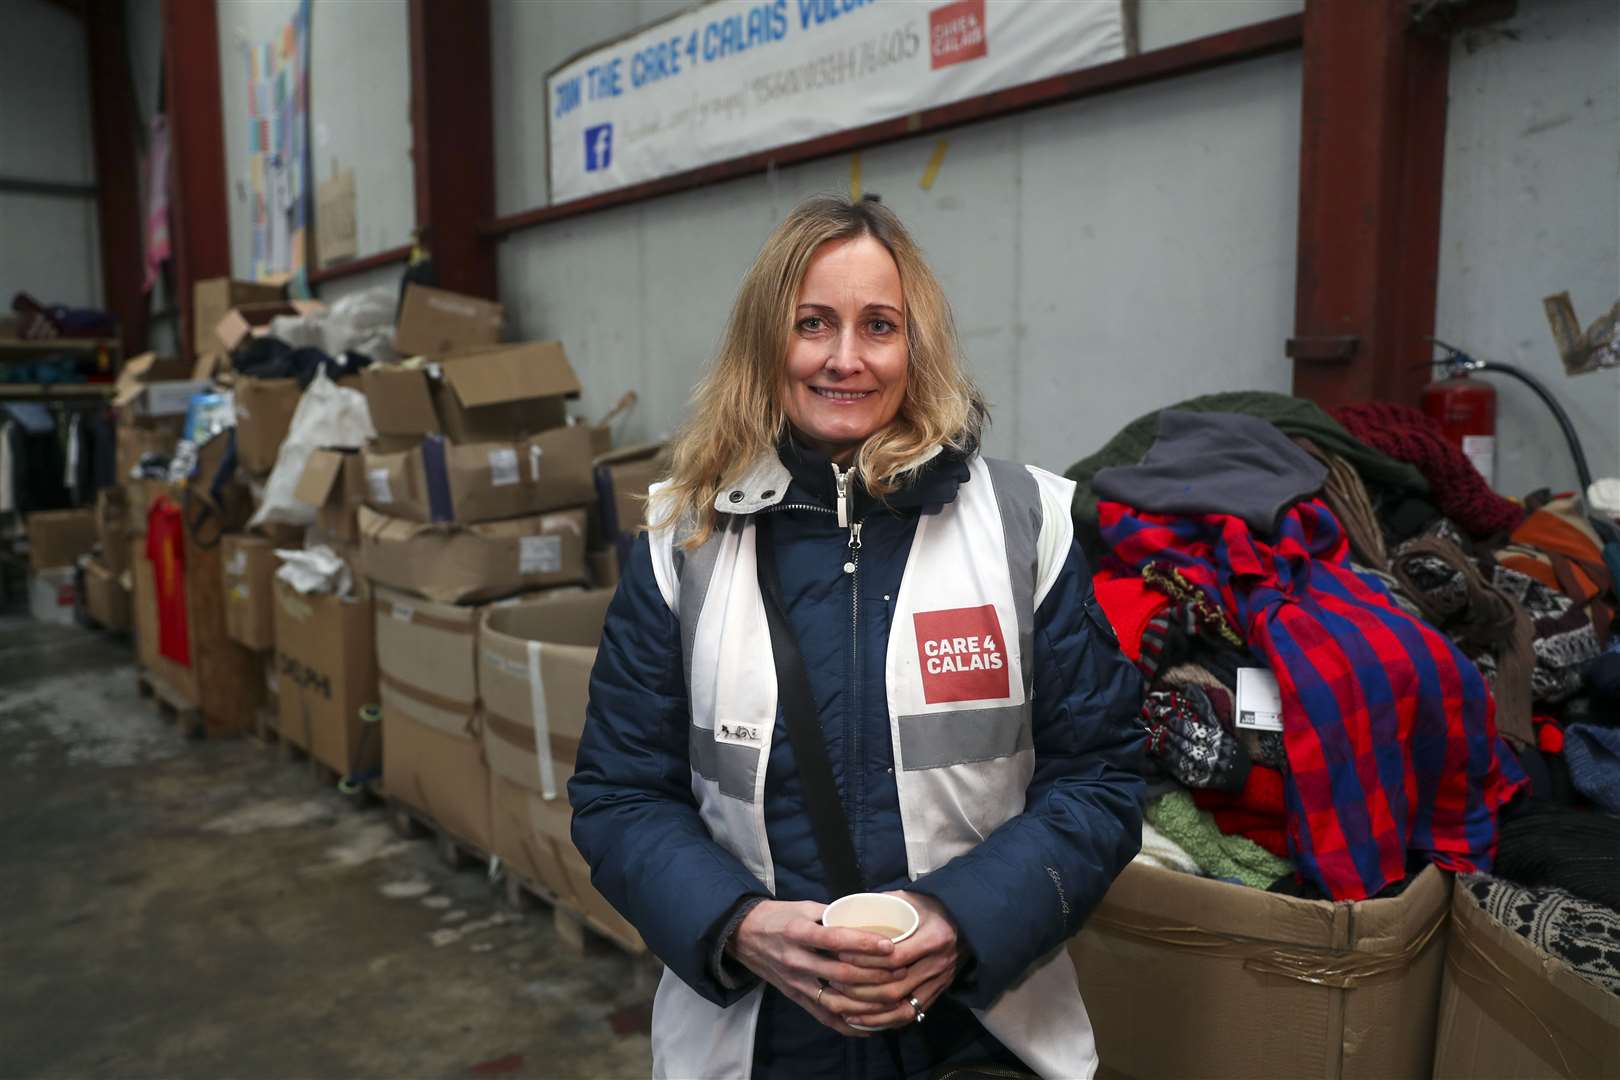 Clare Moseley, founder of Care4Calais in their warehouse near Calais (Steve Parsons/PA)